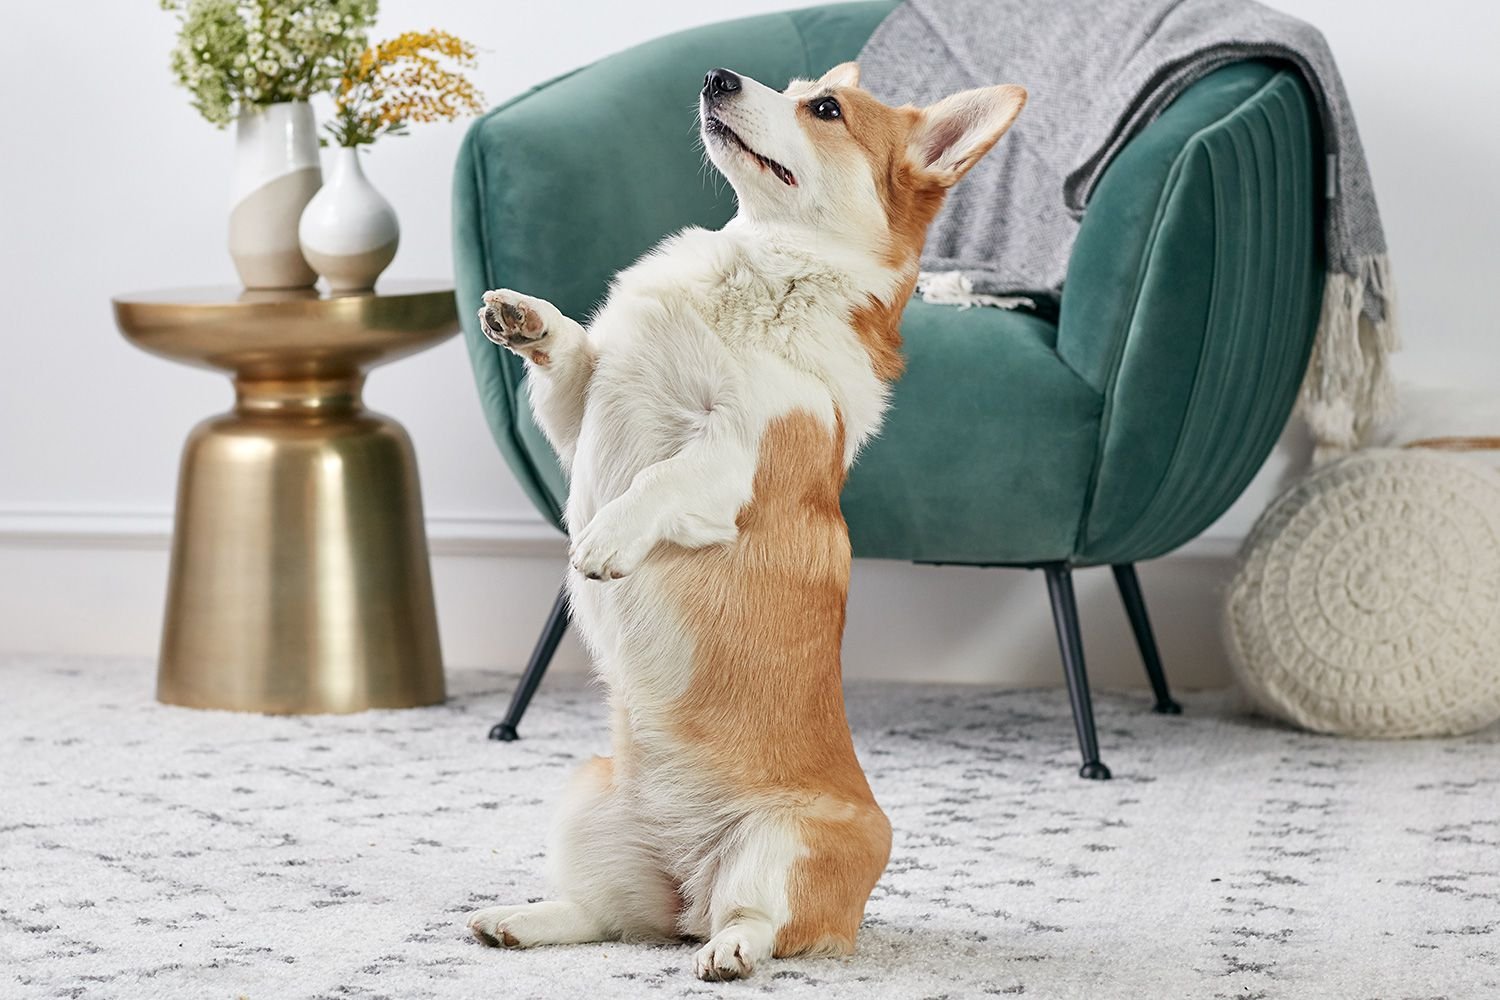 21 Fun And Popular Dog Tricks Any Dog Can Learn